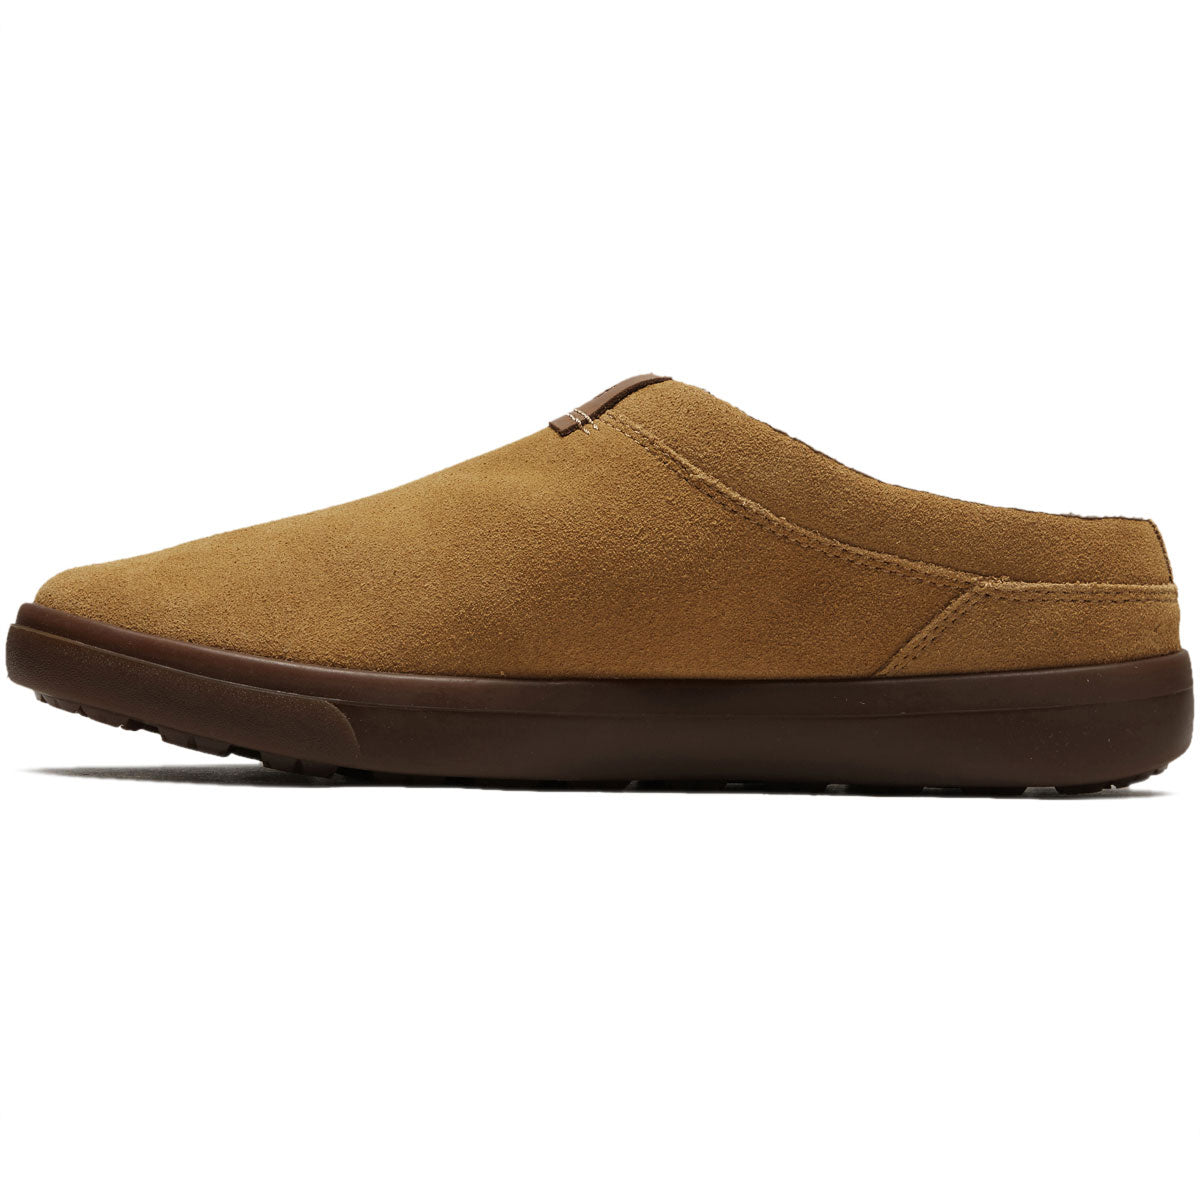 Timberland Ashwood Park Slipper Shoes - Wheat Suede image 2